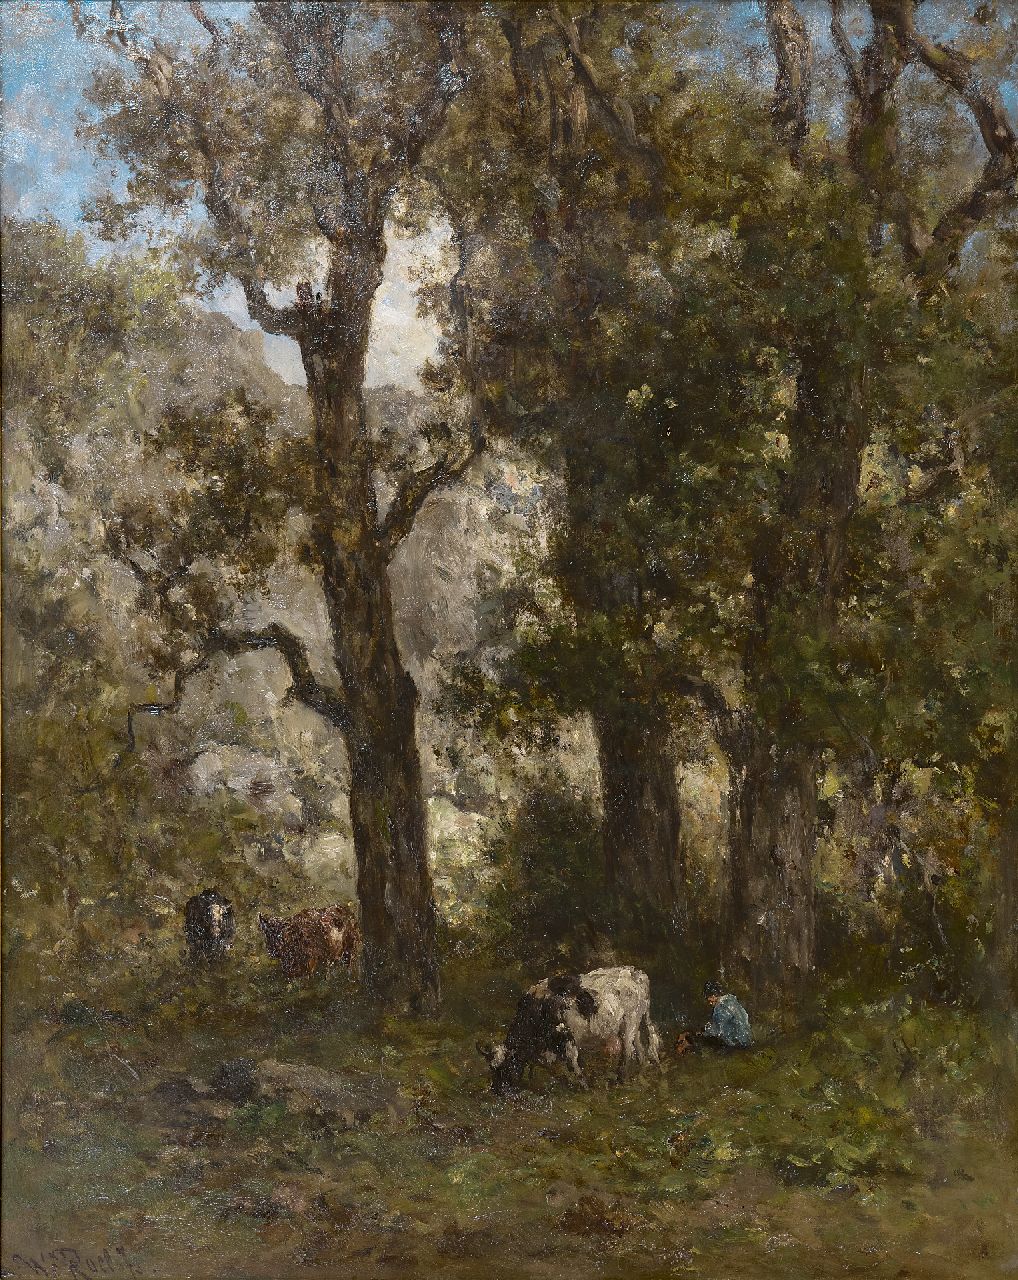 Roelofs W.  | Willem Roelofs, Cowherd with cows in the woods, oil on panel 56.1 x 45.8 cm, signed l.l.